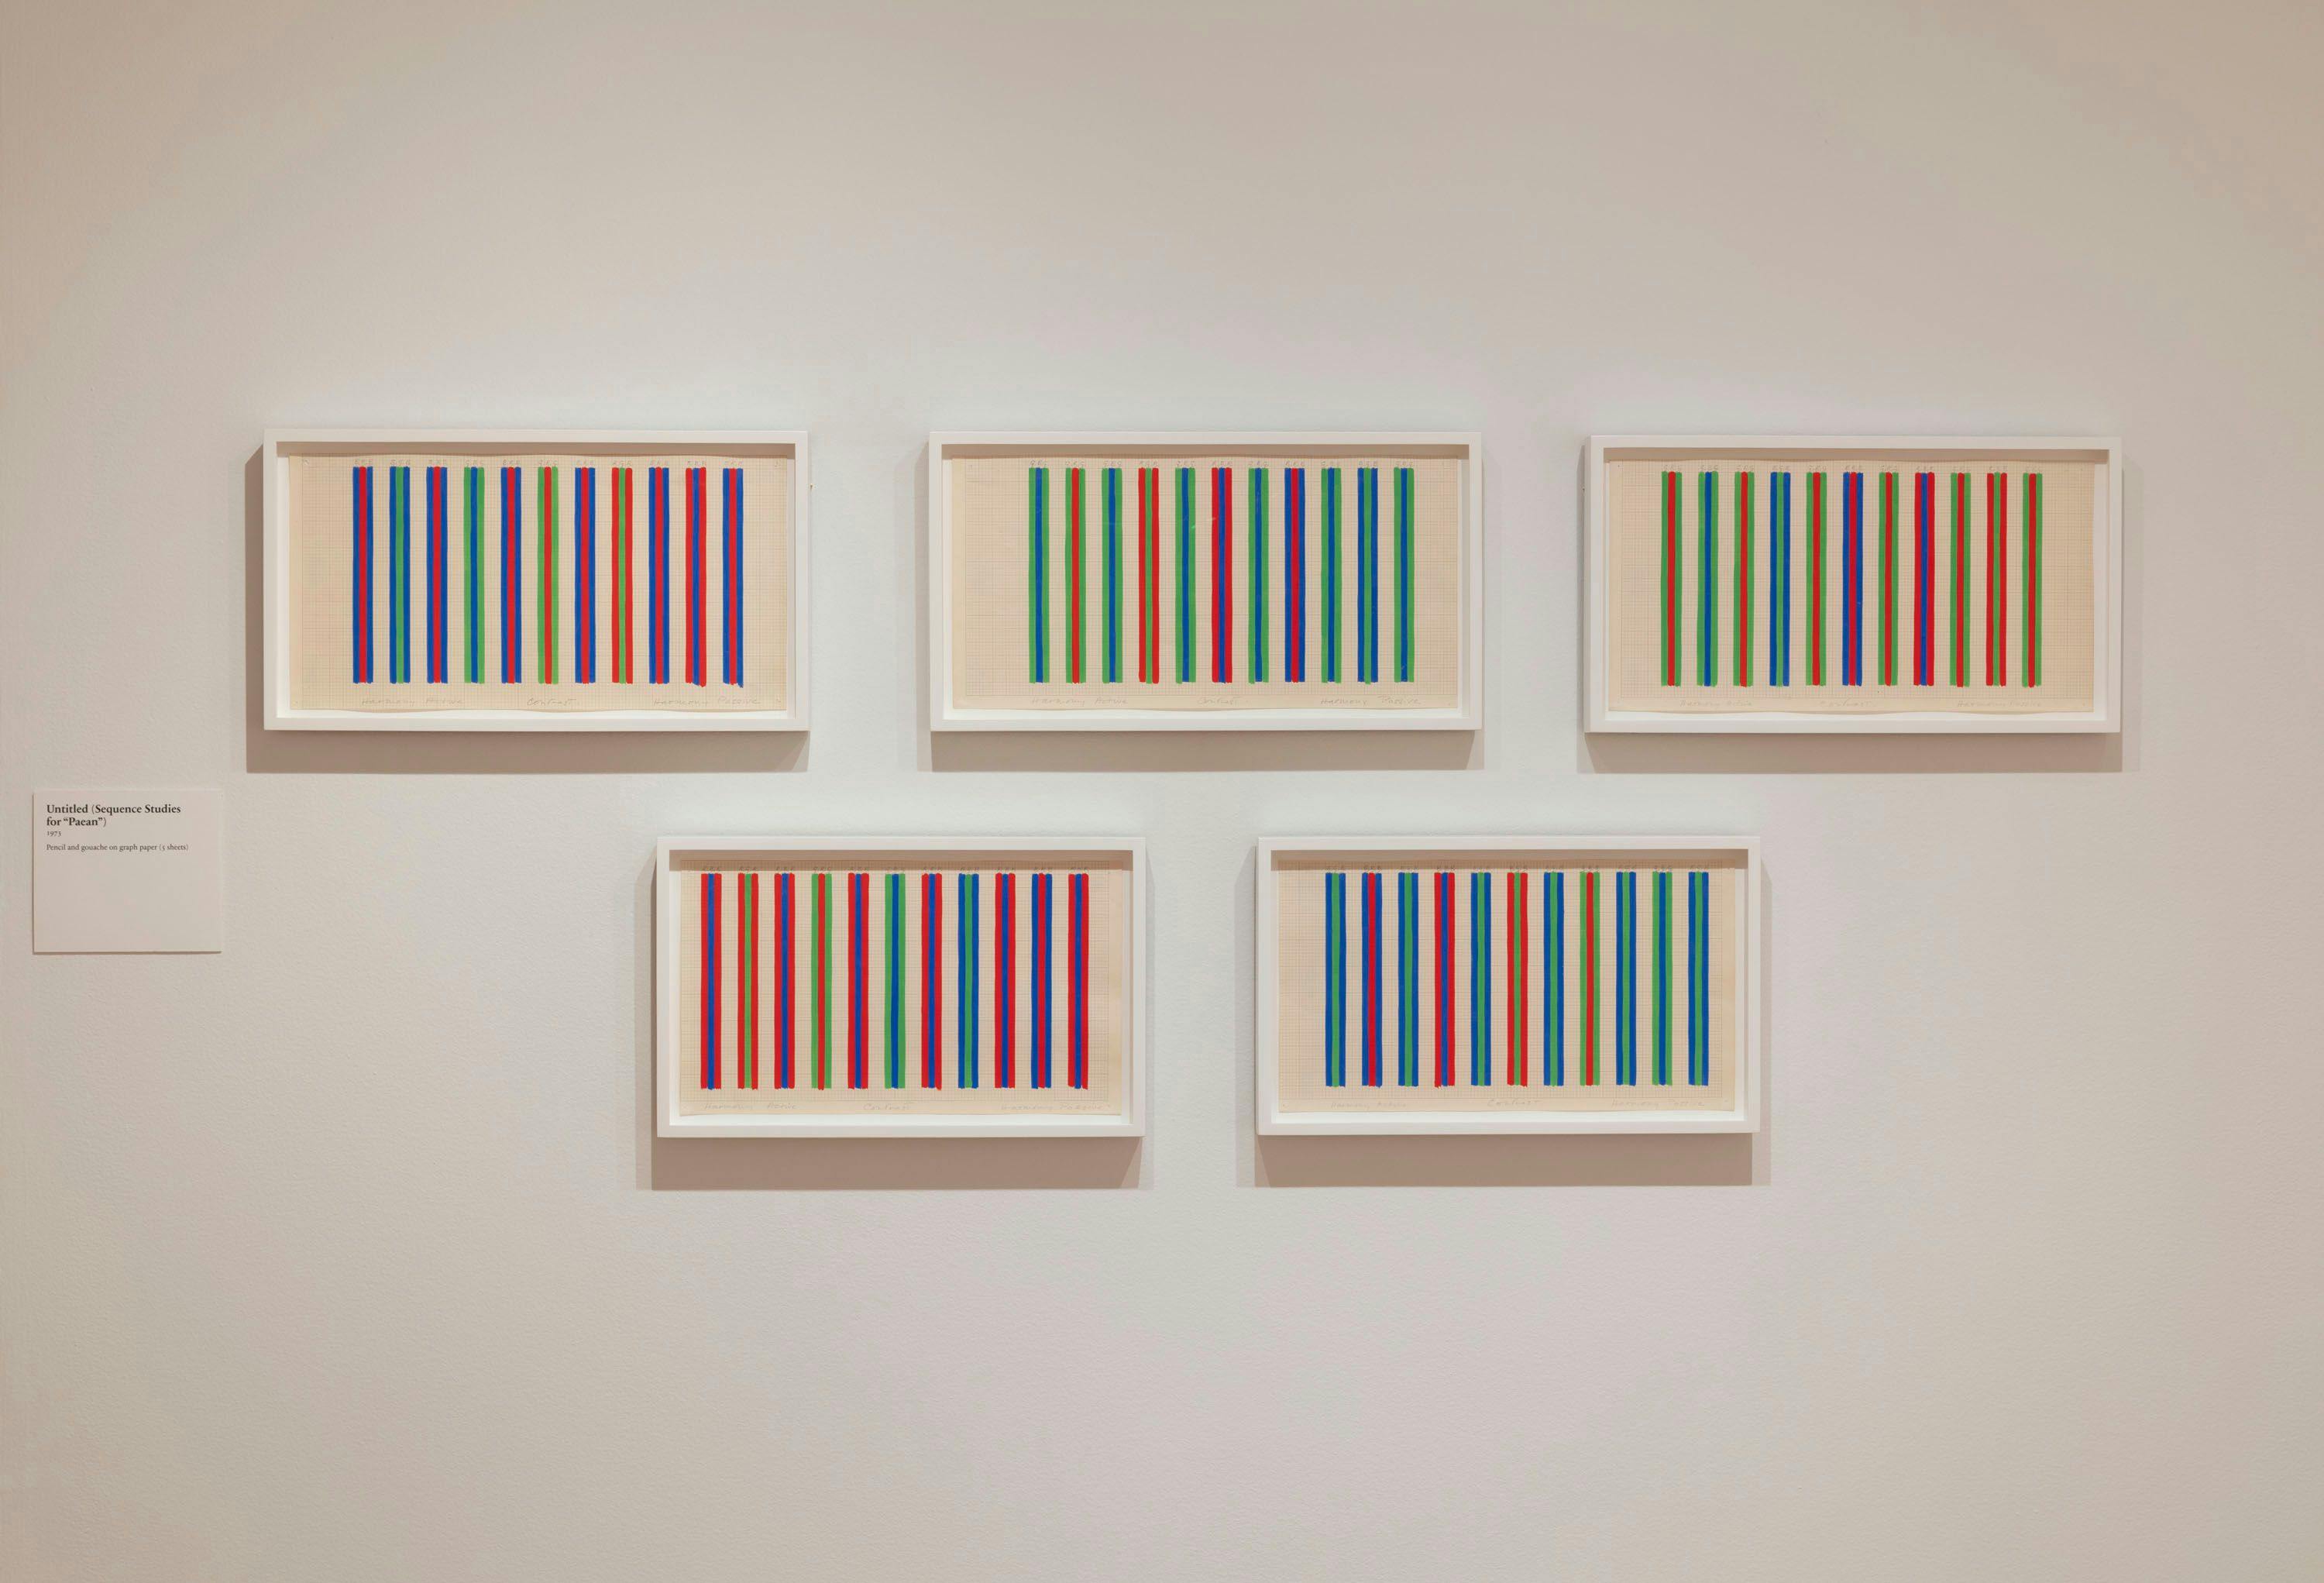 Installation view of the exhibition, Bridget Riley: Bridget Riley Drawings: From the Artist's Studio, at the Art Institute Chicago in Chicago, dated 2022.